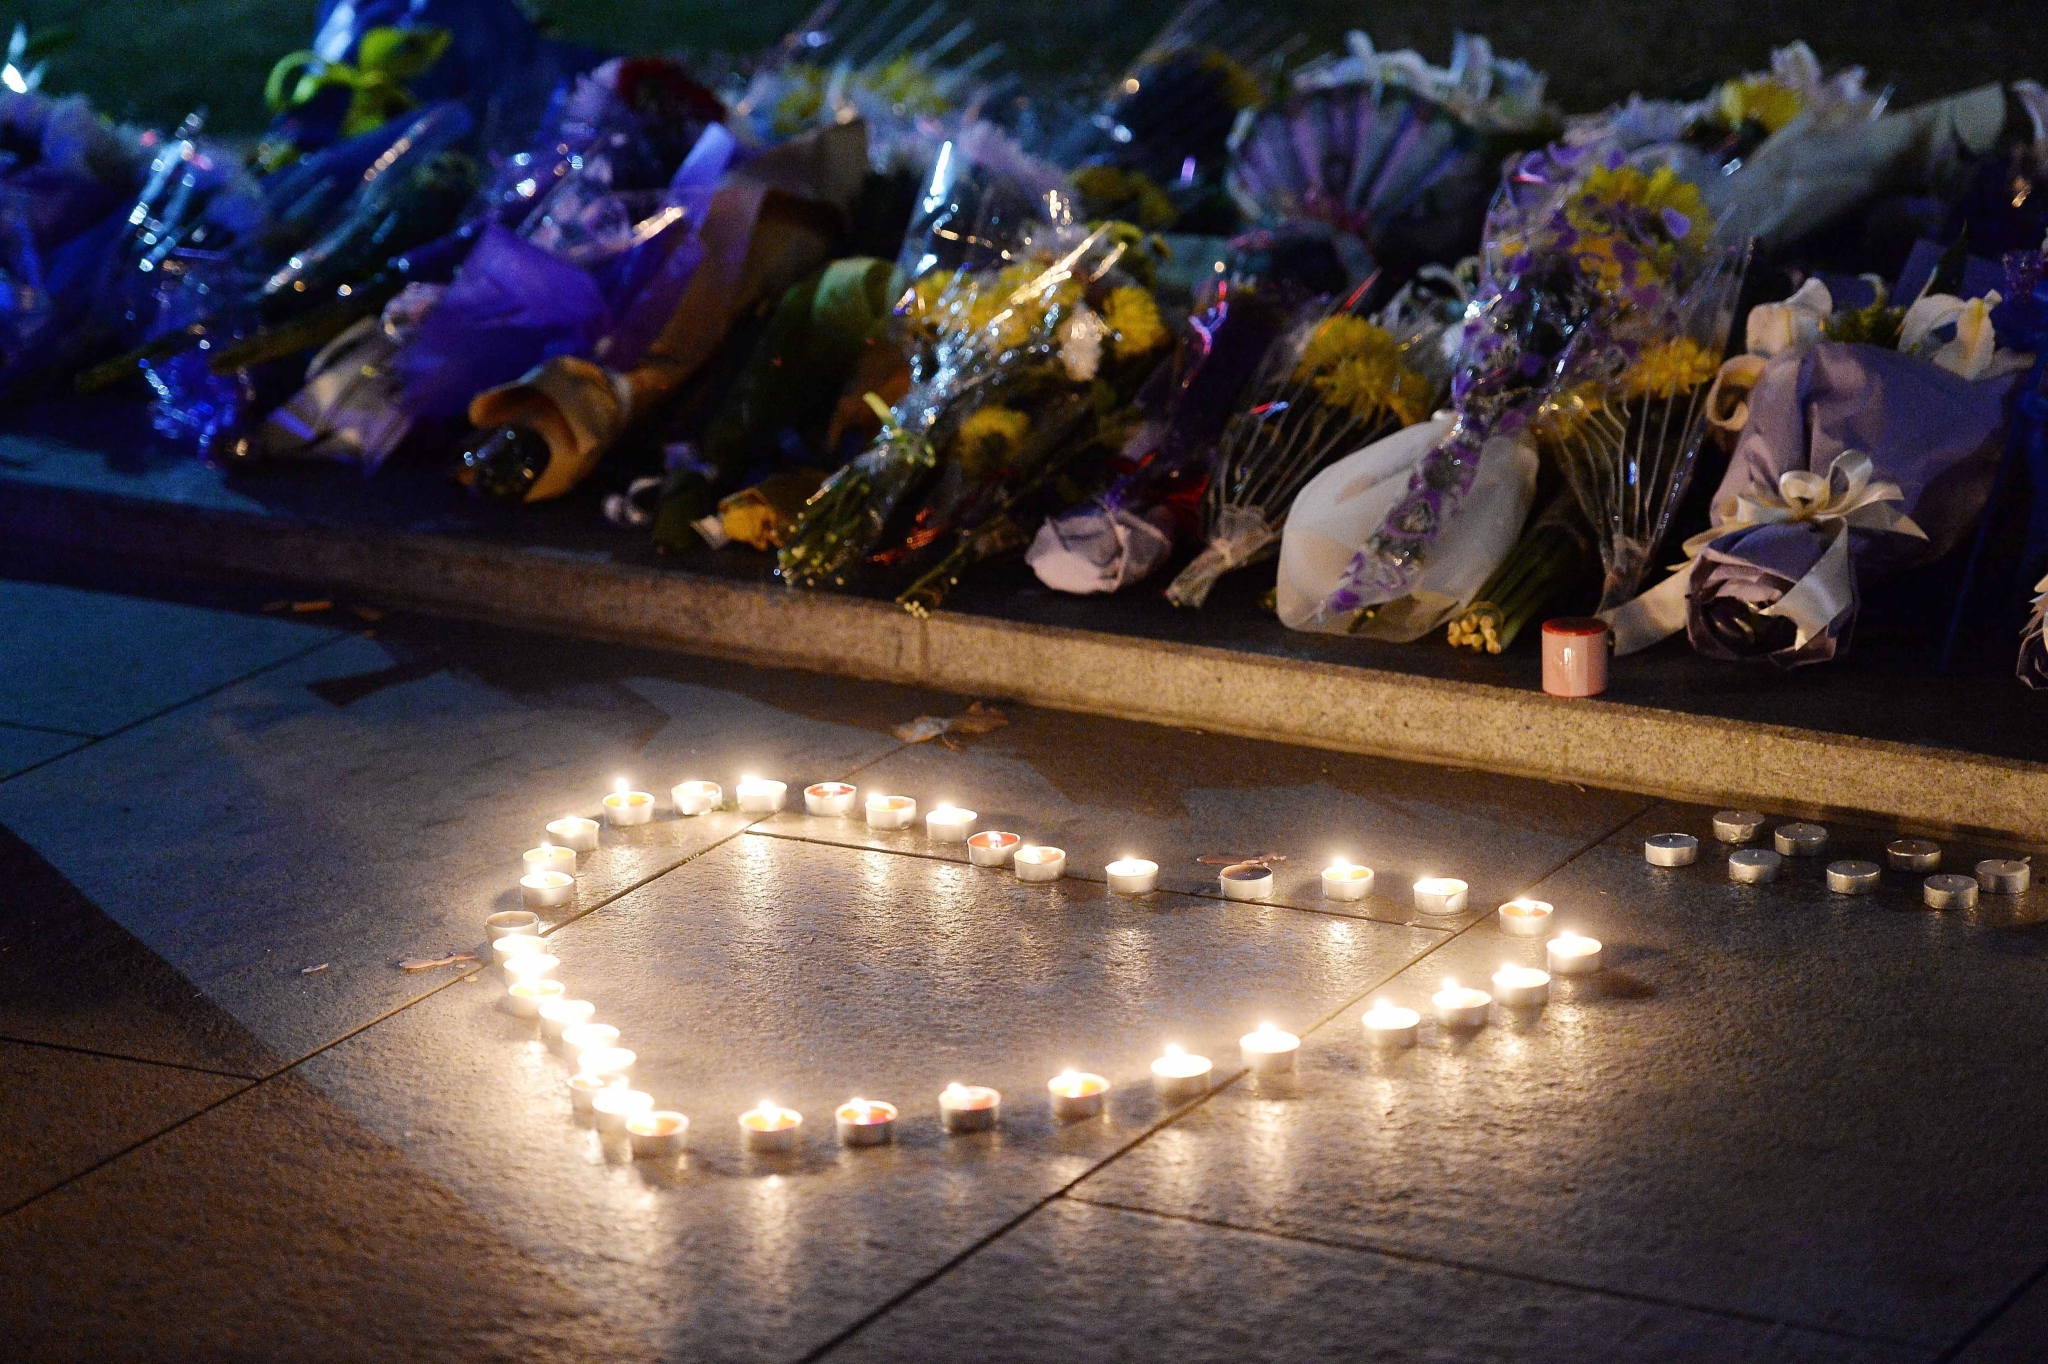 Candles and flowers are placed by mourners for the victims of the stampede, in front of the statue of the late Shanghai mayor Chen Yi near the stampede site on the Bund in Shanghai, China, late 01 January 2015. Photo: EPA